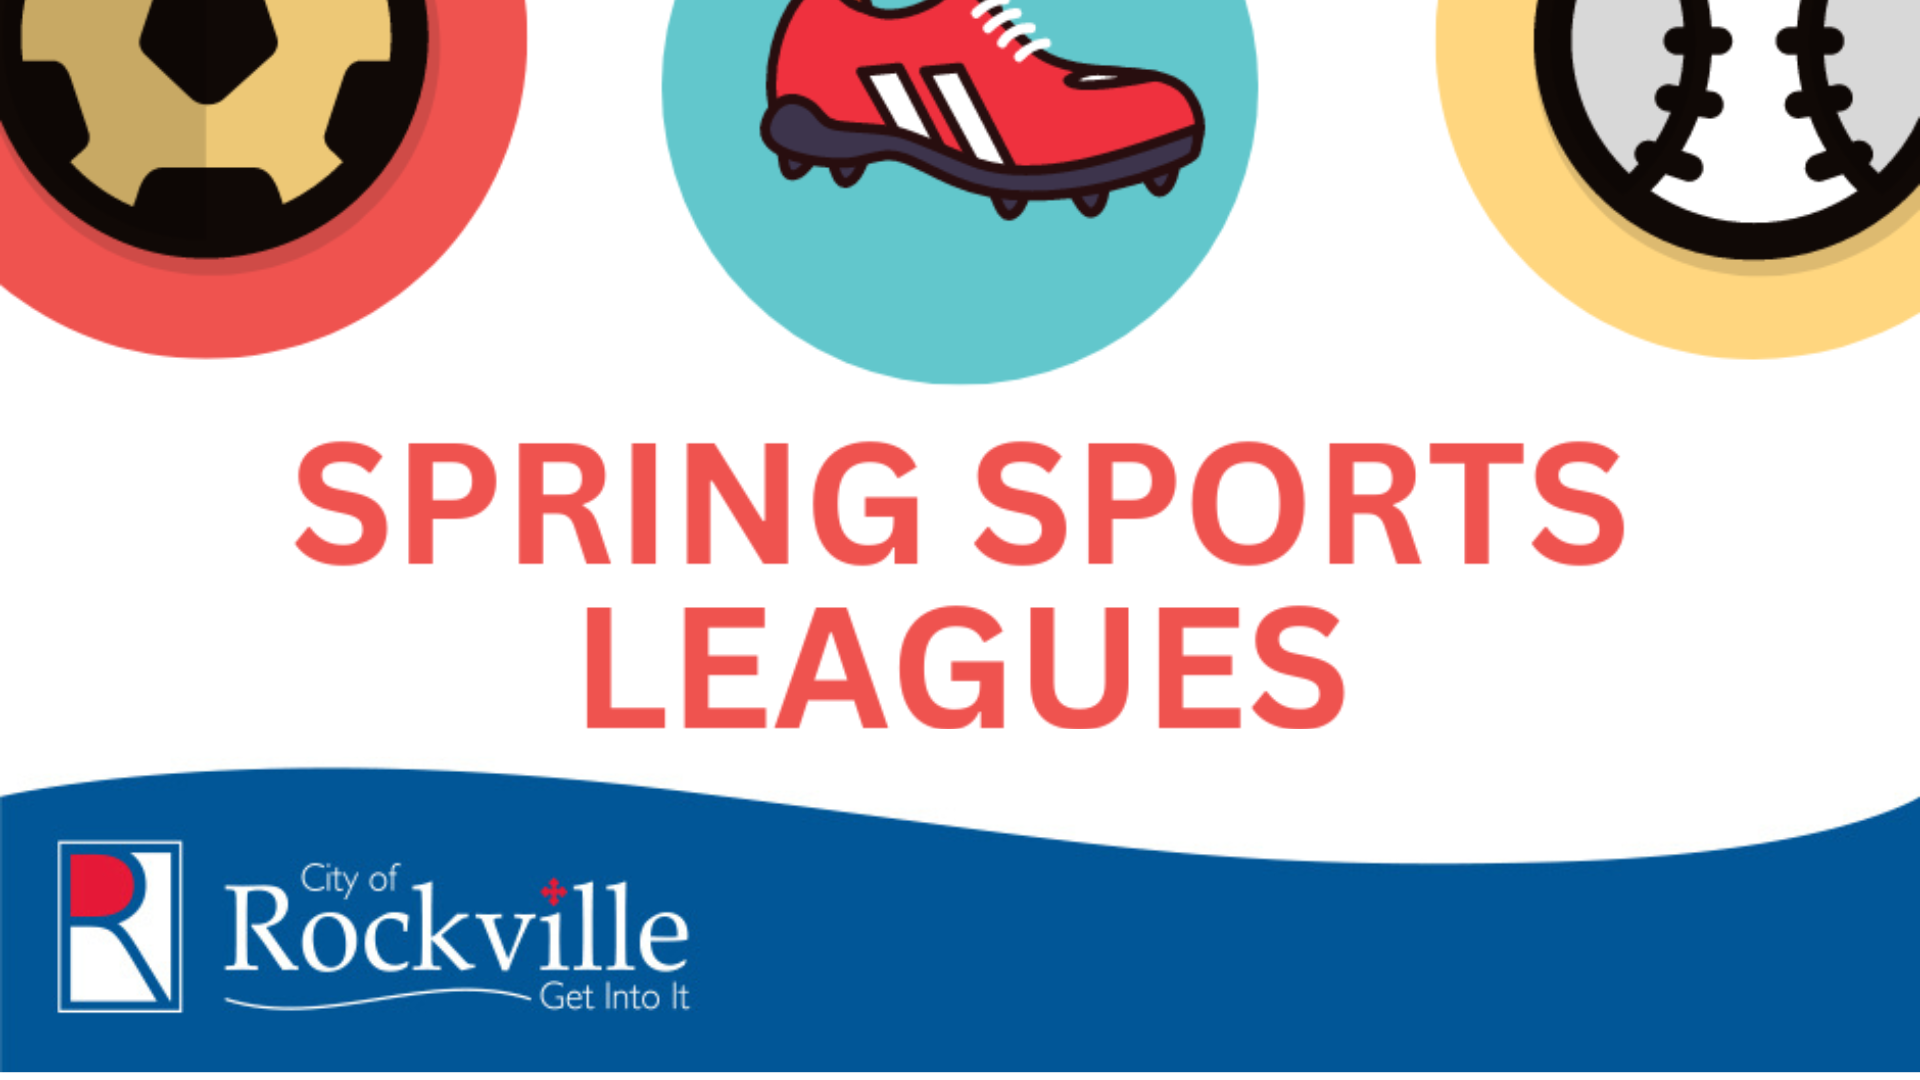 Register now for the City of Rockville Adult Spring Sports Leagues!